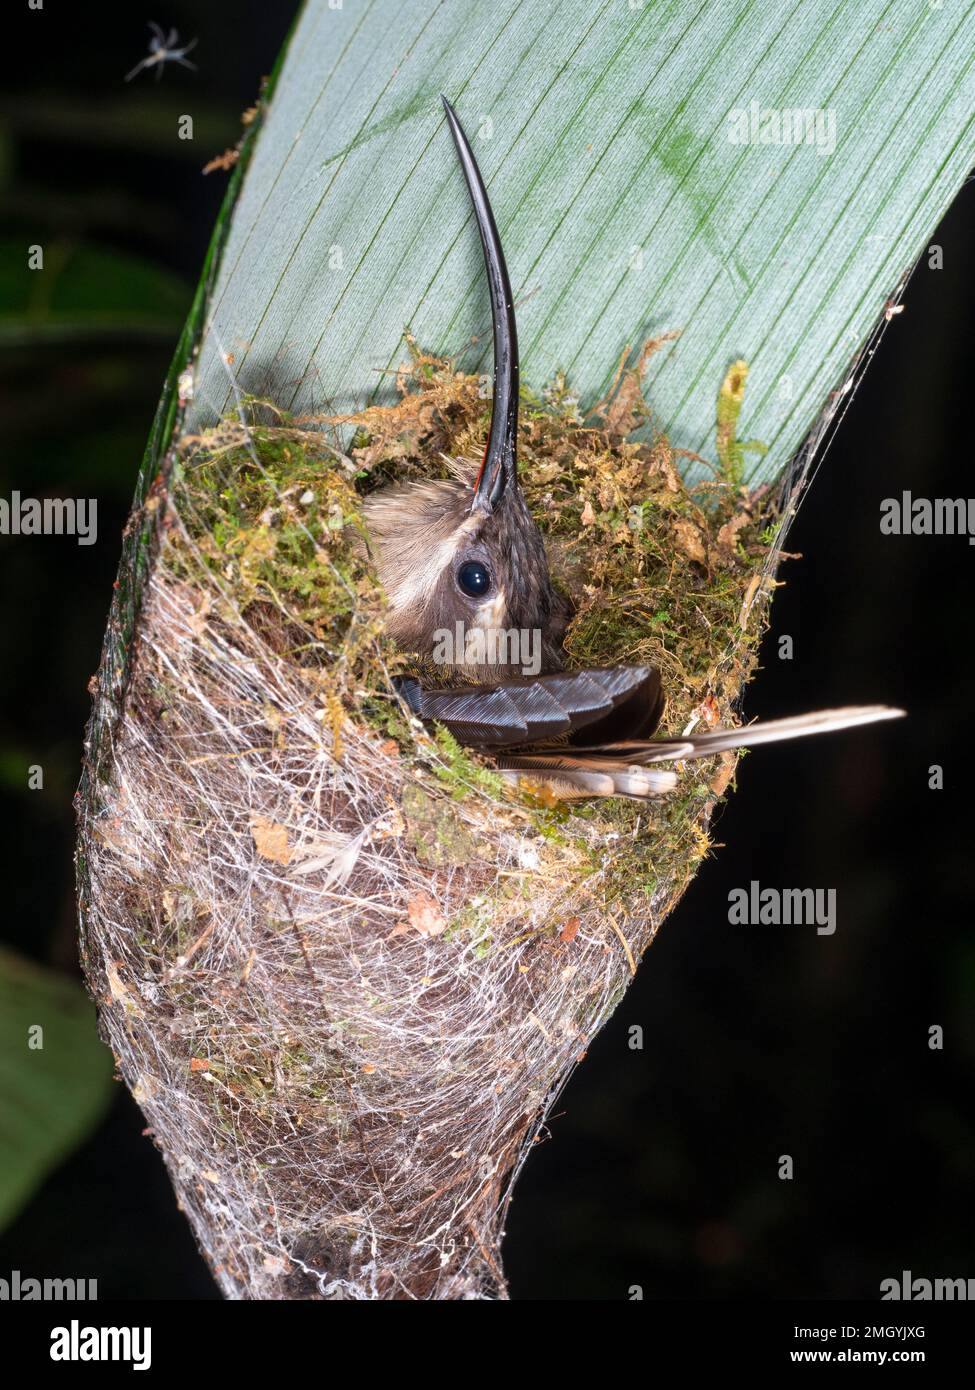 Hermit hummingbird sitting in its nest suspended from the tip of a palm leaf in the rainforest, Orelllana province, Ecuador Stock Photo